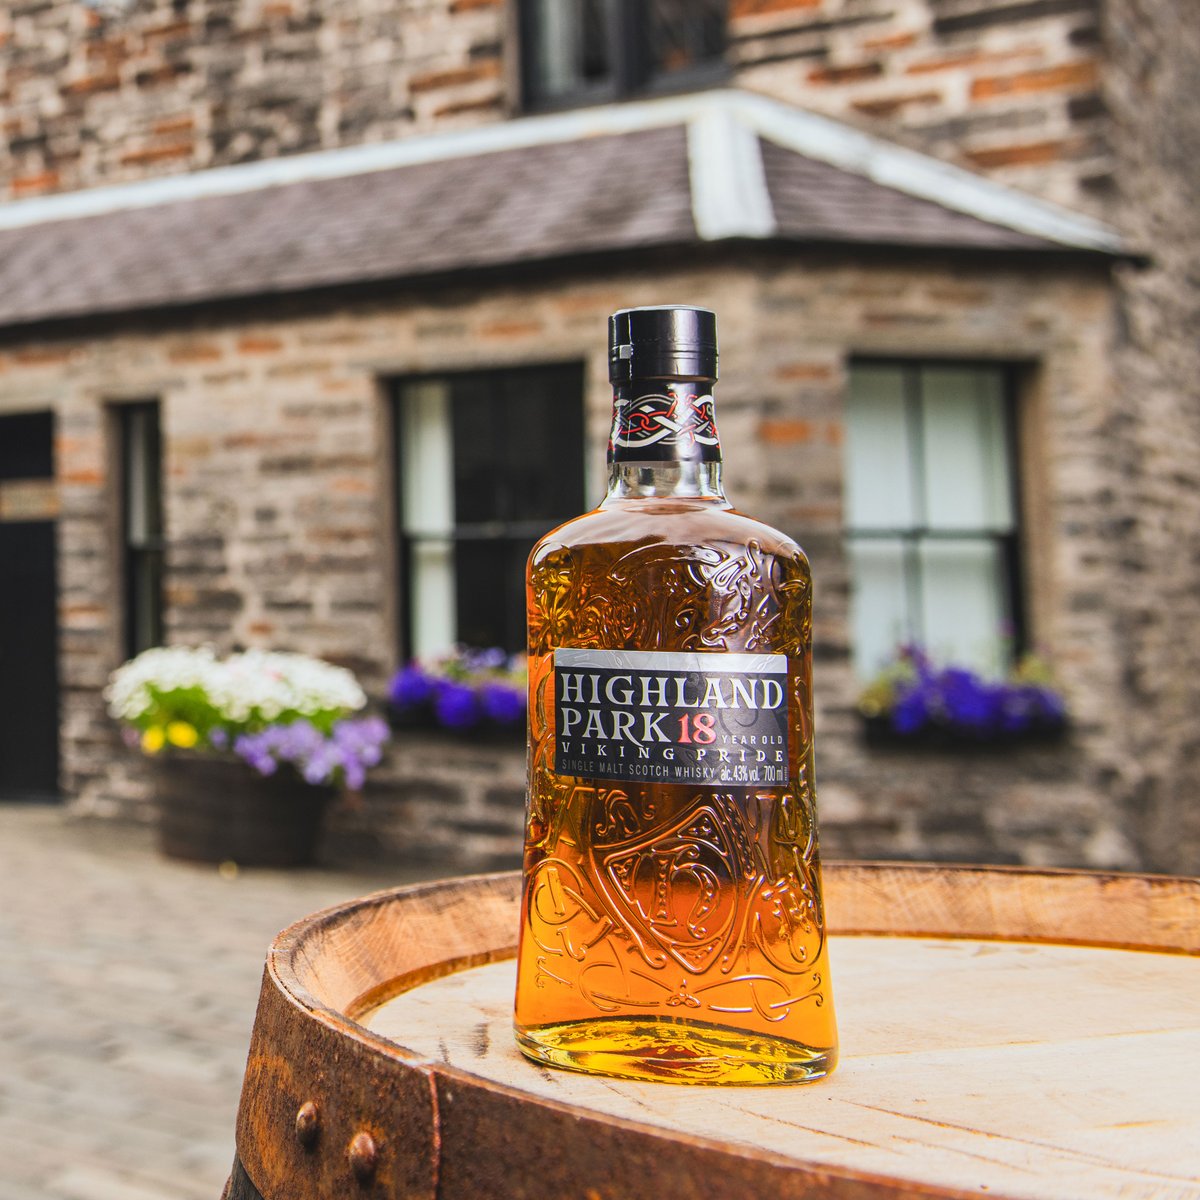 A true icon, Highland Park 18-year-old, from our home to yours. #HighlandParkWhisky Please enjoy Highland Park responsibly.